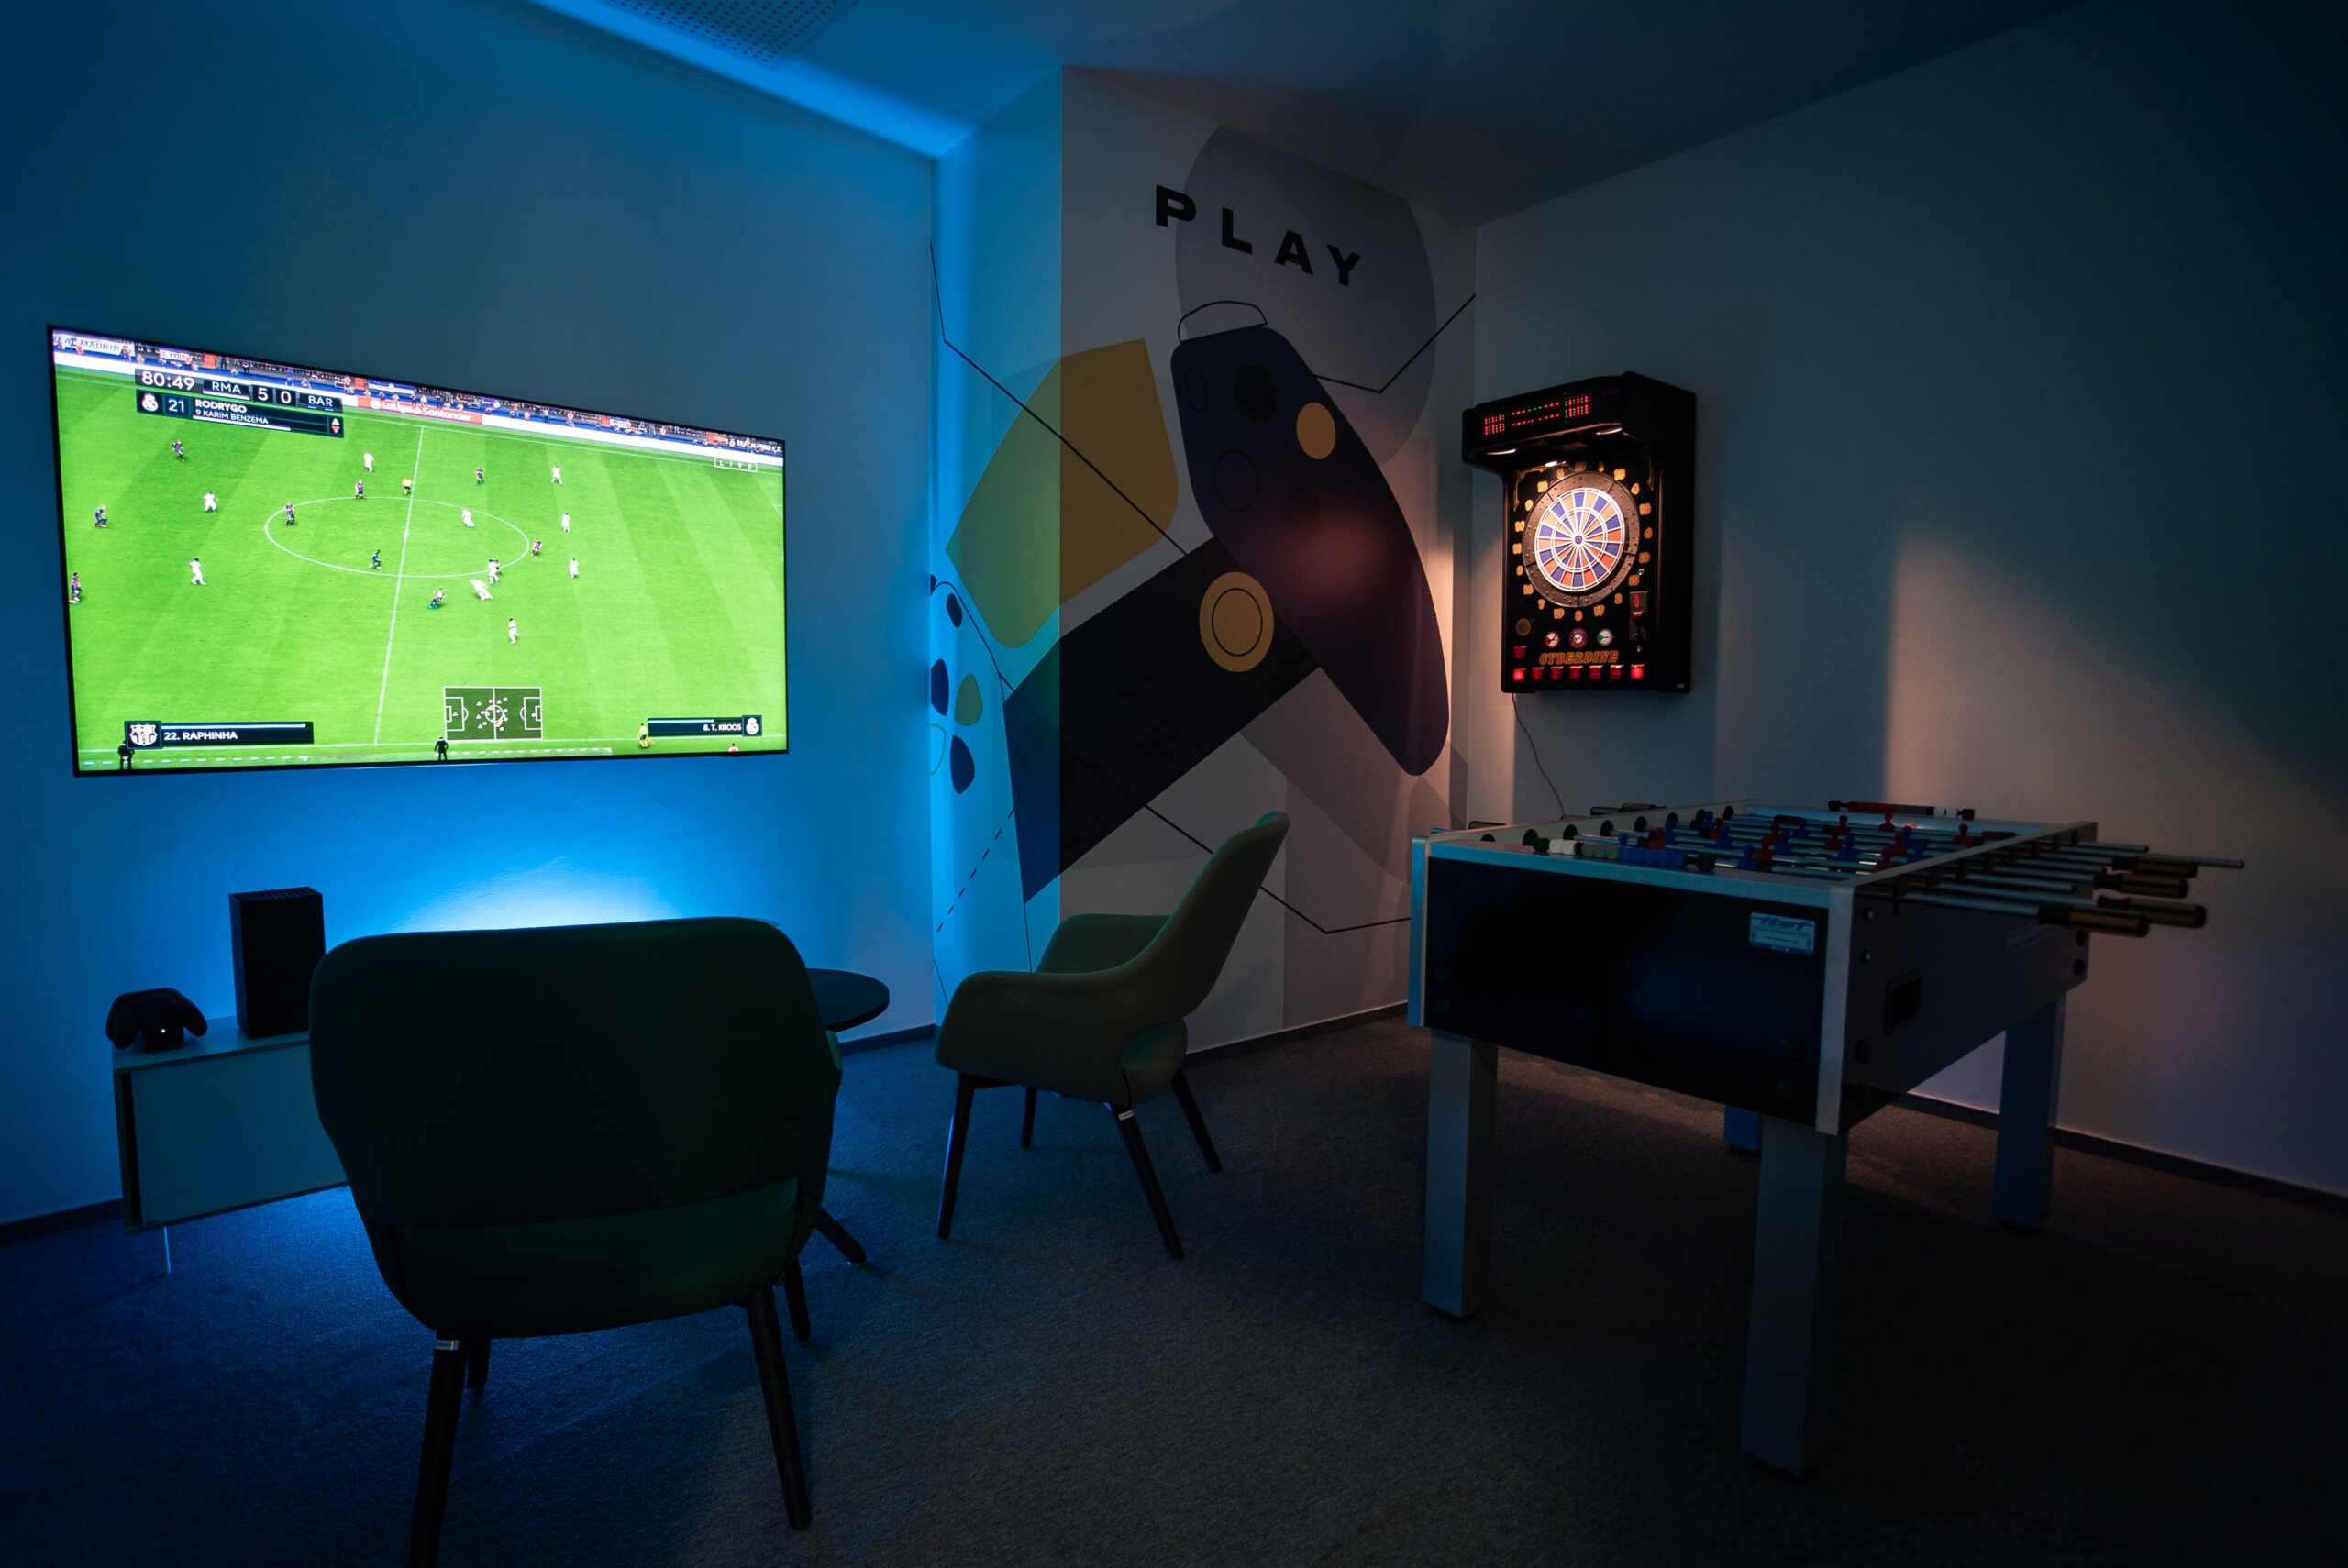 relaxation room with table football and dartboard